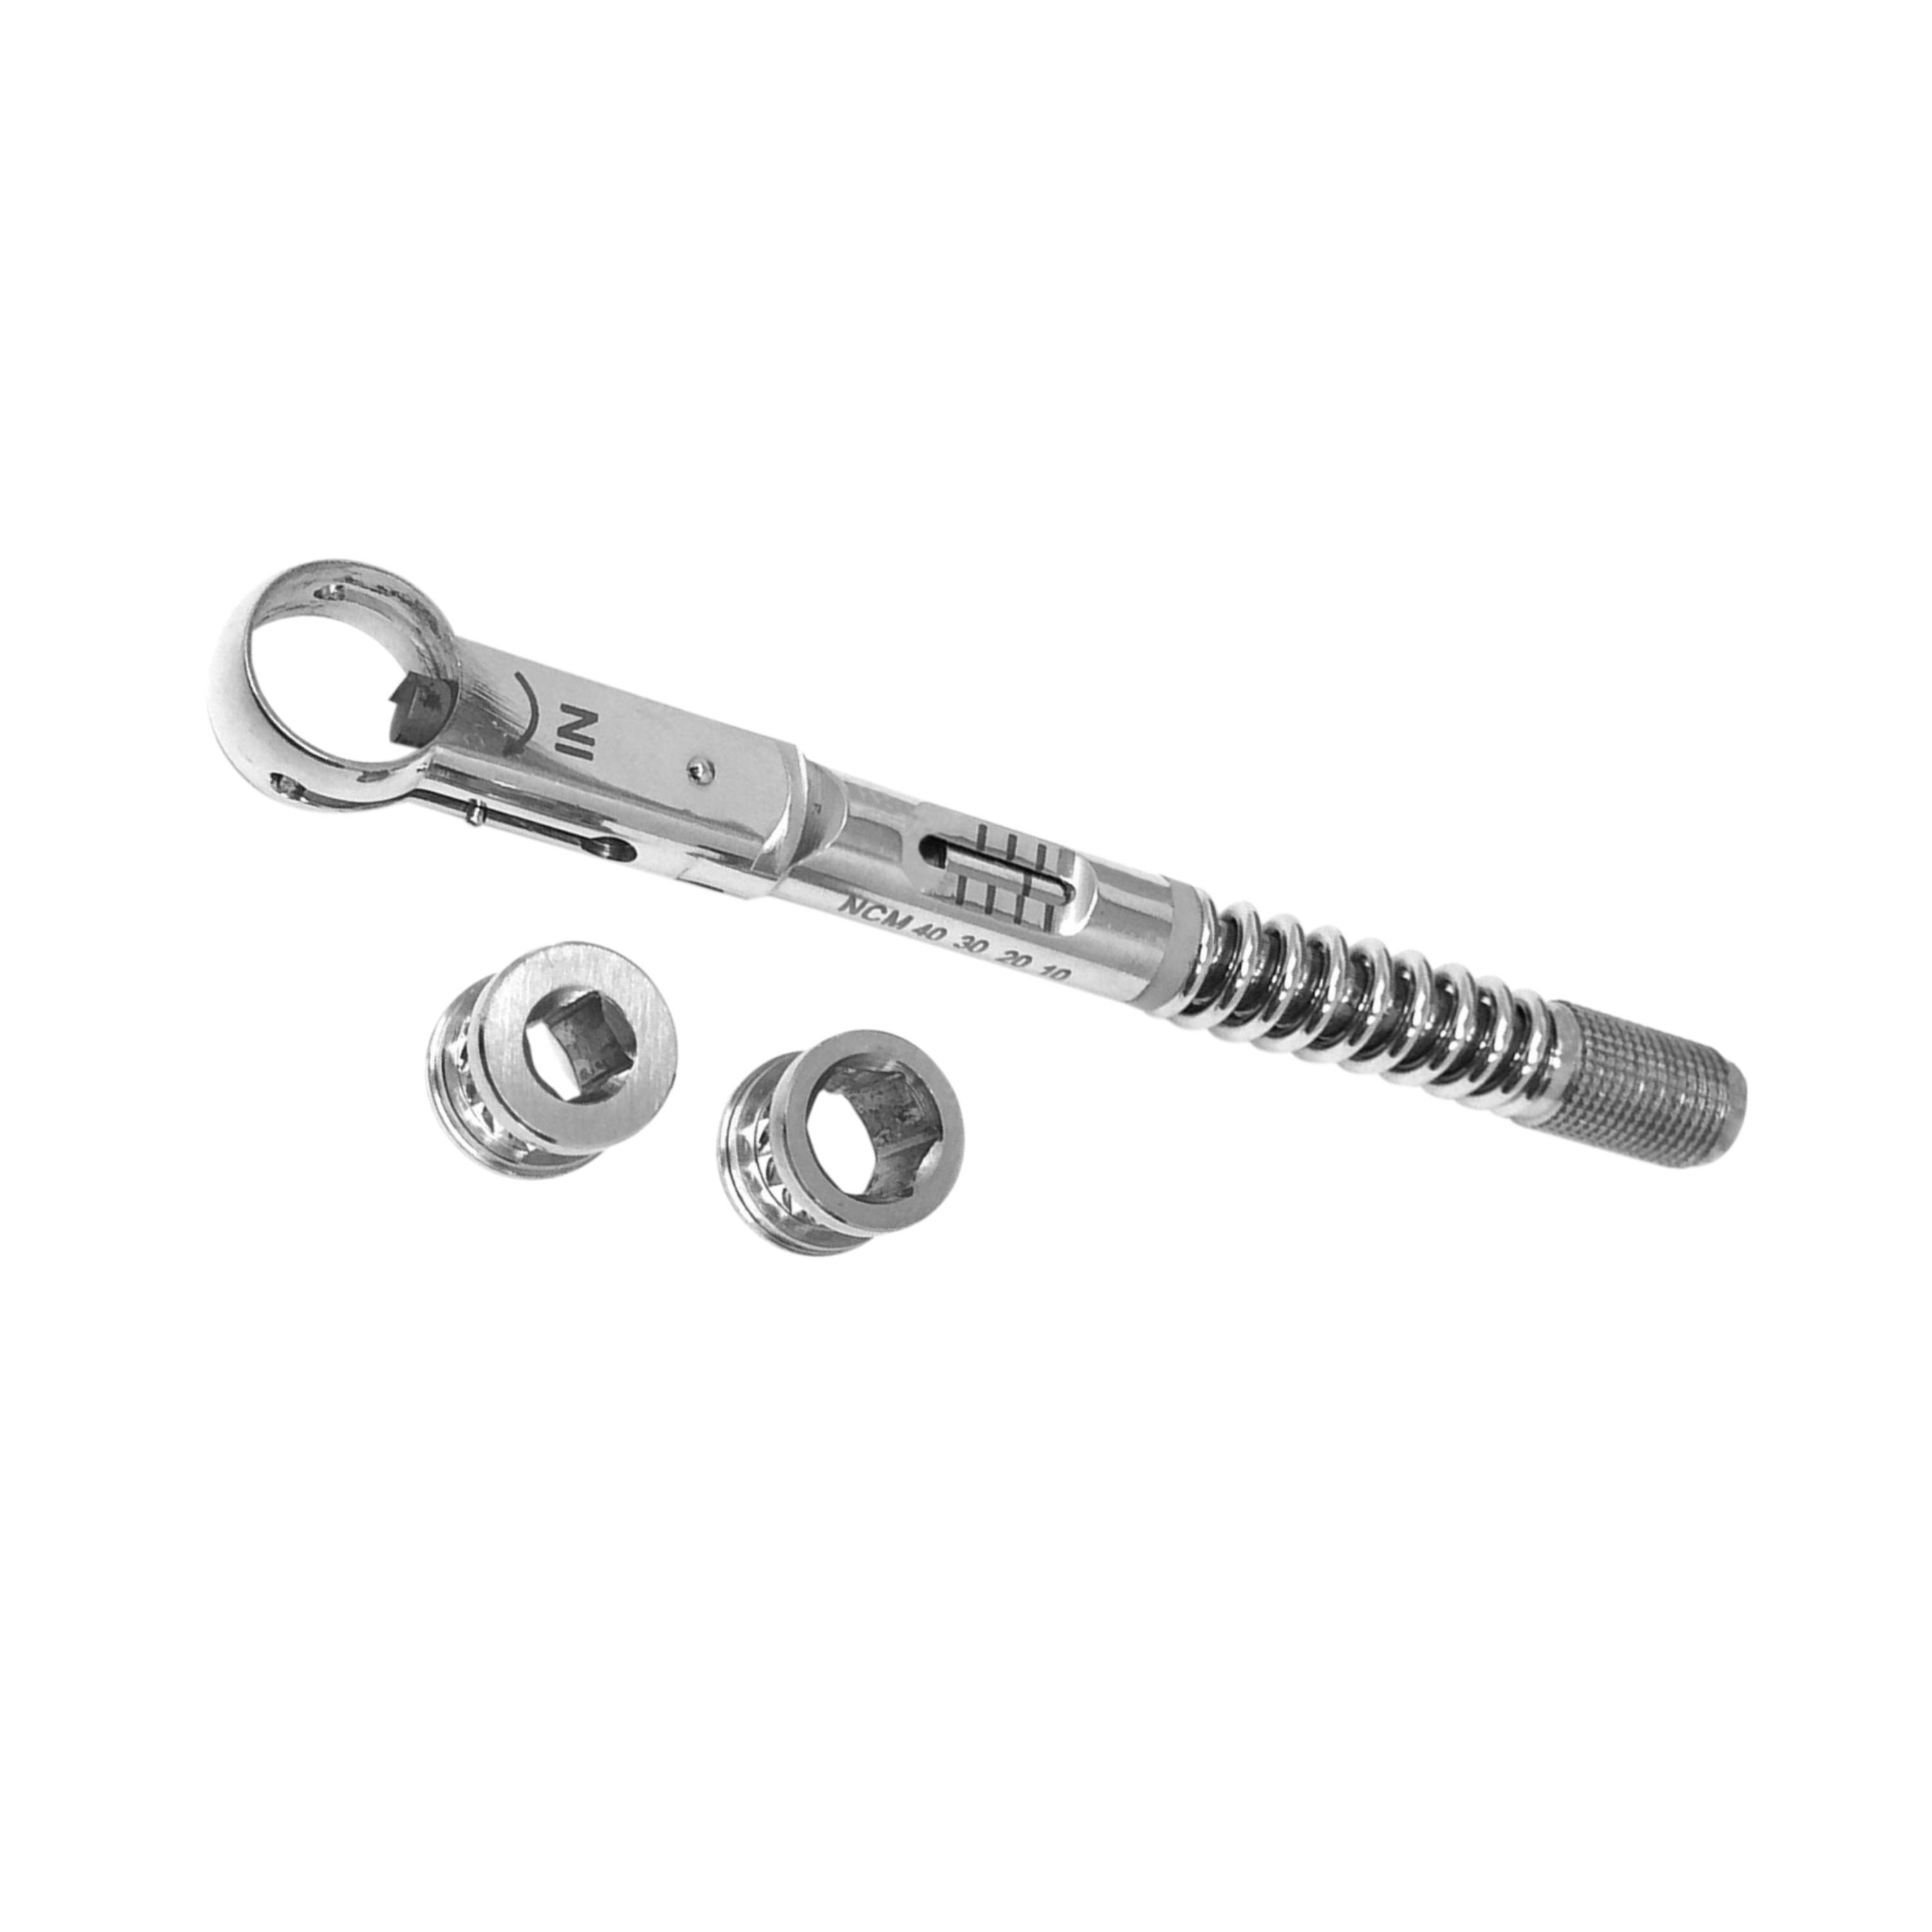 Trust & Care Implant Torque Wrench Universal